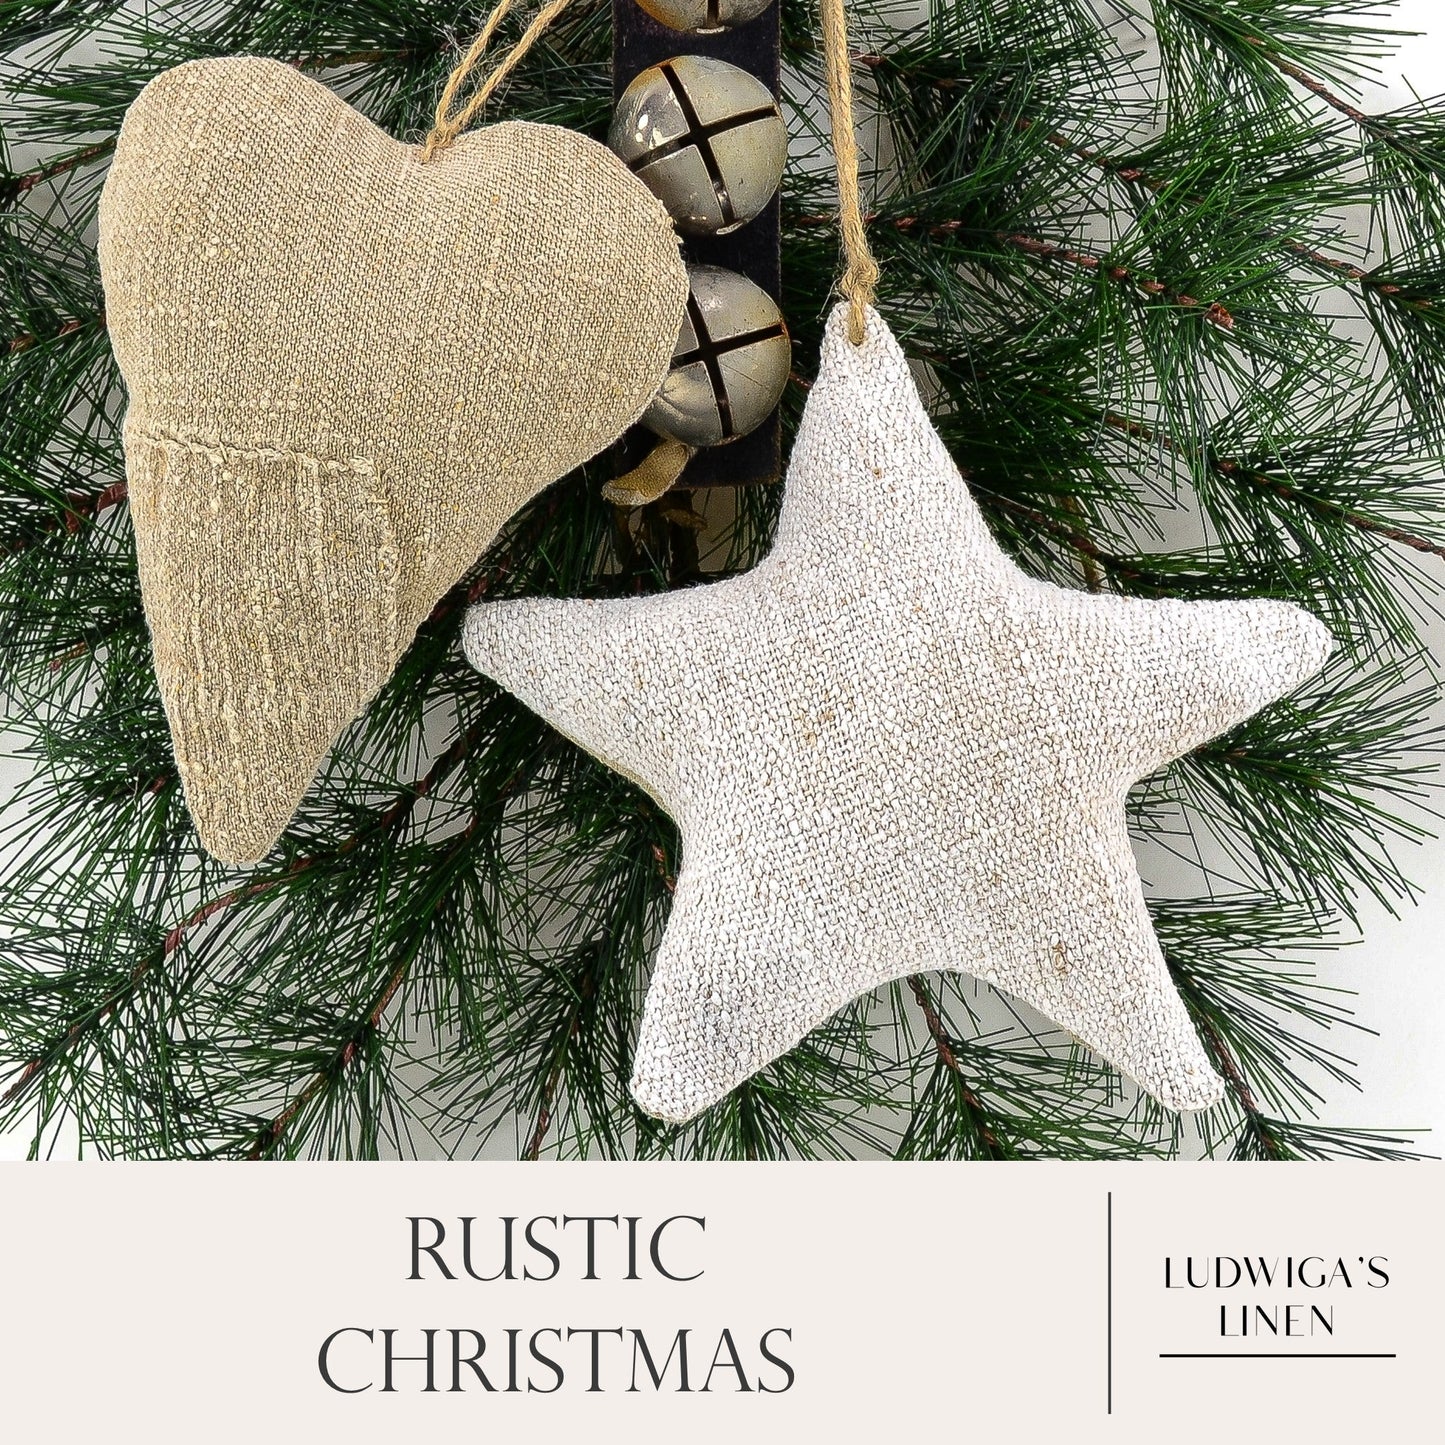 Christmas/holiday ornament - antique European grain sack linen heart and star fastened together with twine